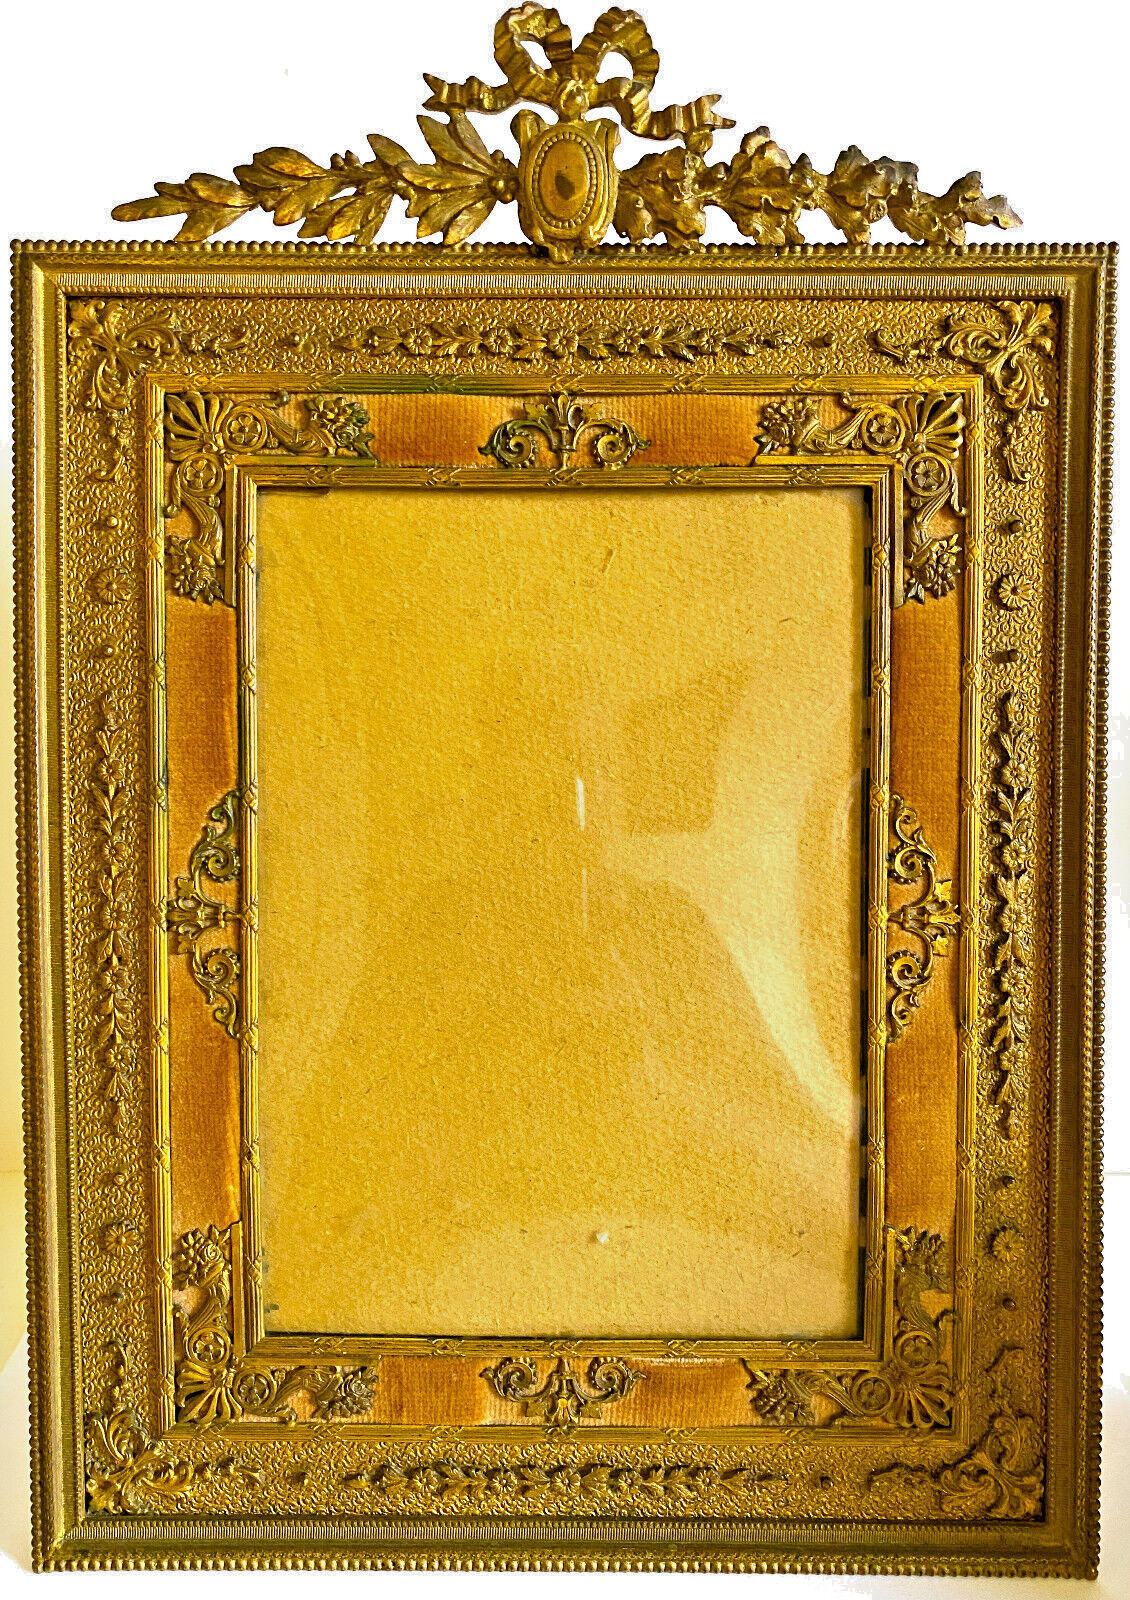 Fabulous Antique French Elaborate Dore Bronze Easel Picture Frame 12 x 9 ins.